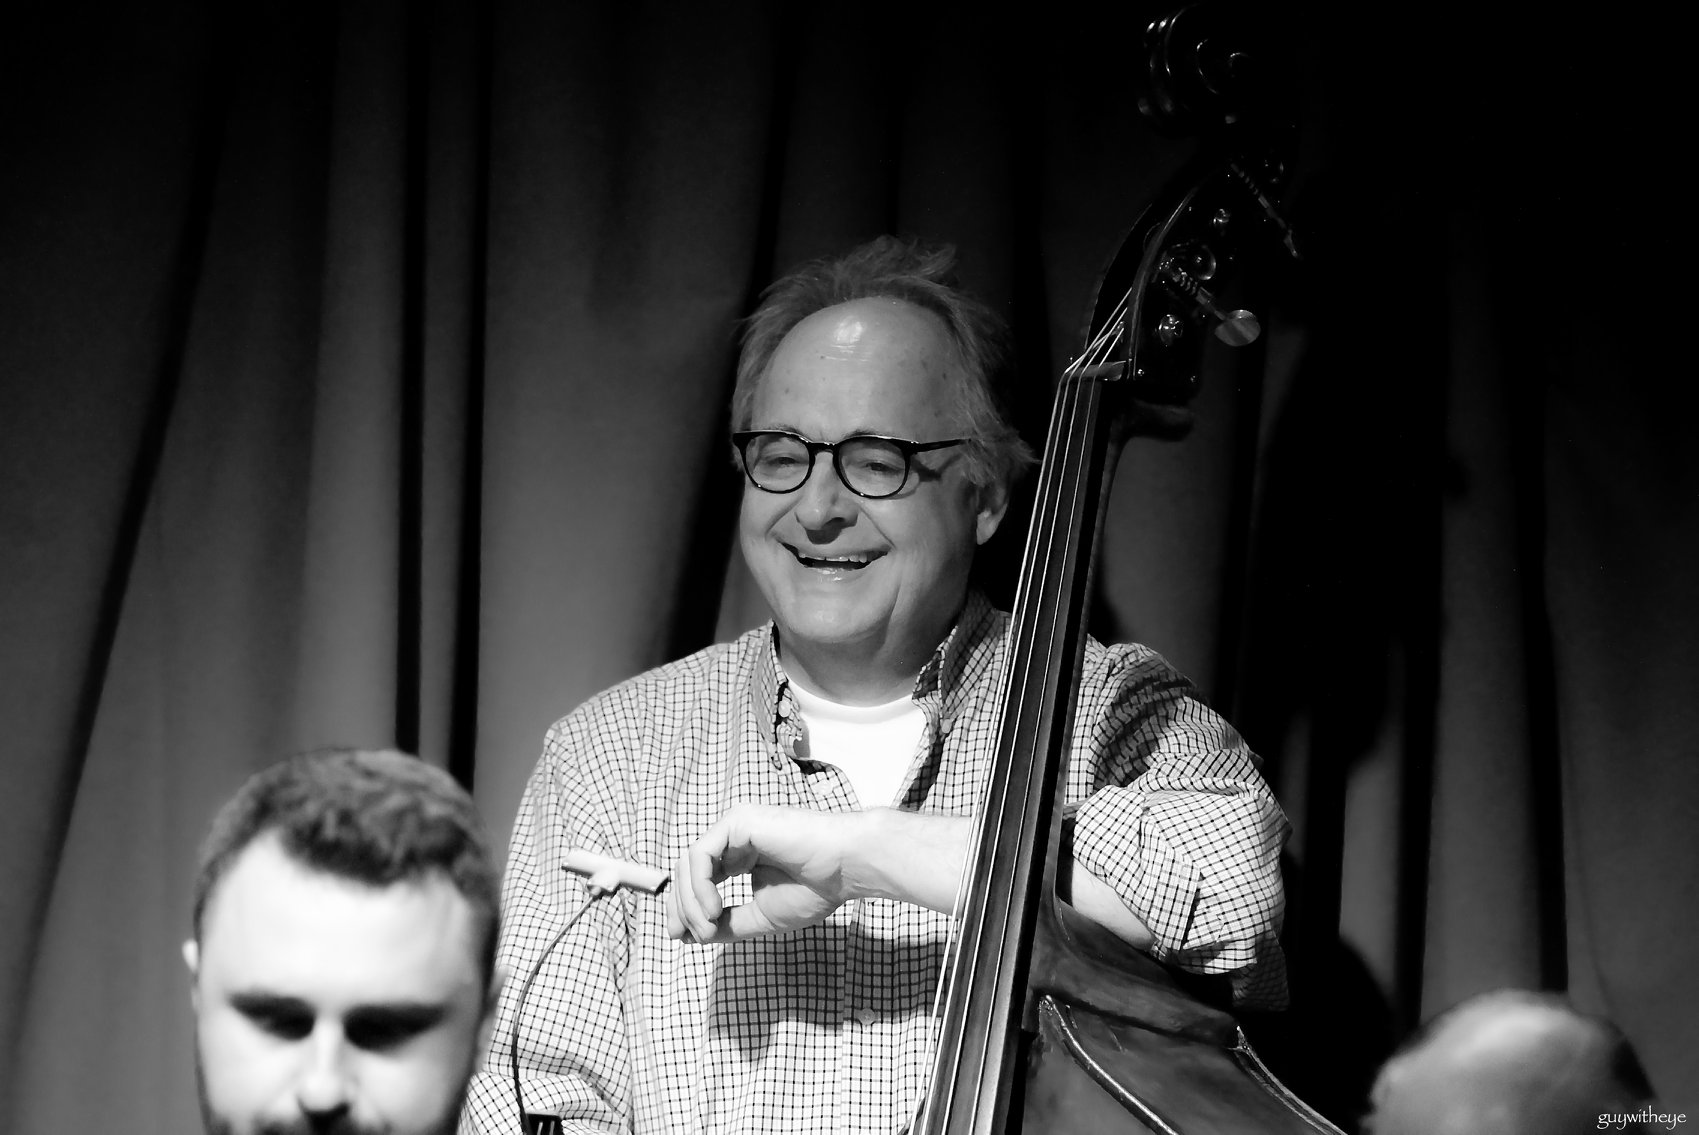 The Bass ~ Swinging from Broadway to Birdland - A master class with bassist Dick Sarpola